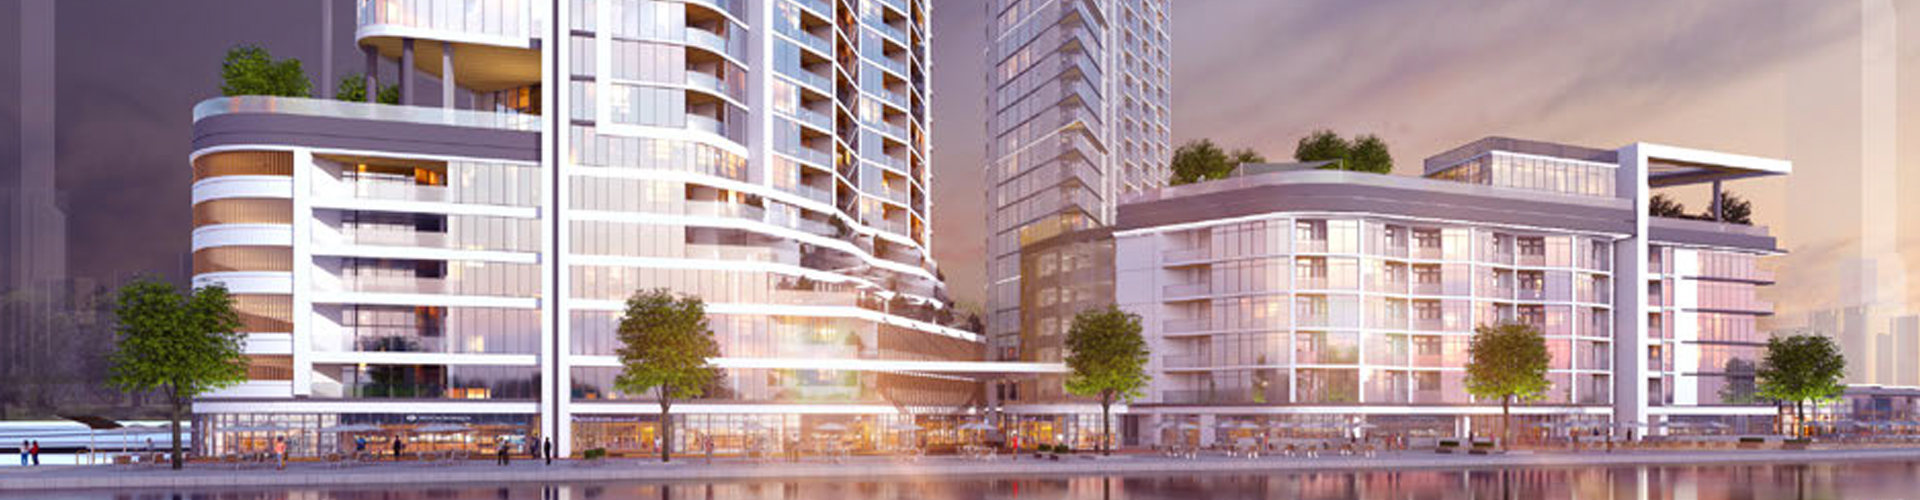 Waves Grande Apartments By Sobha gallery 1